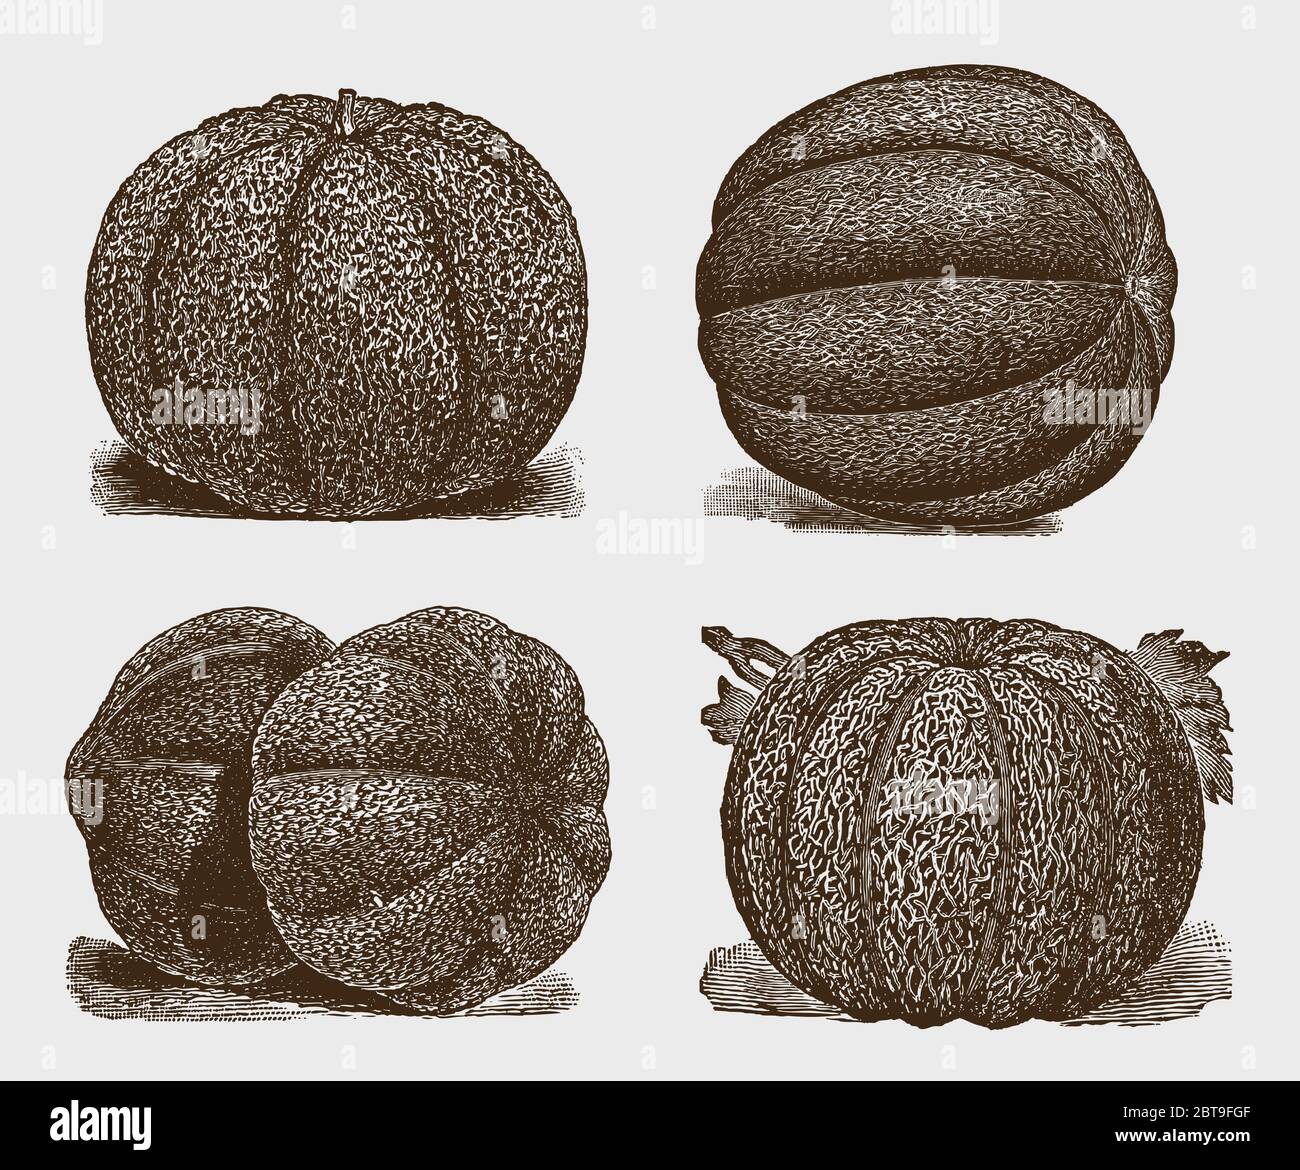 Collection of four muskmelon varieties, arranged symmetrically, after historical engravings from the early 20th century Stock Vector